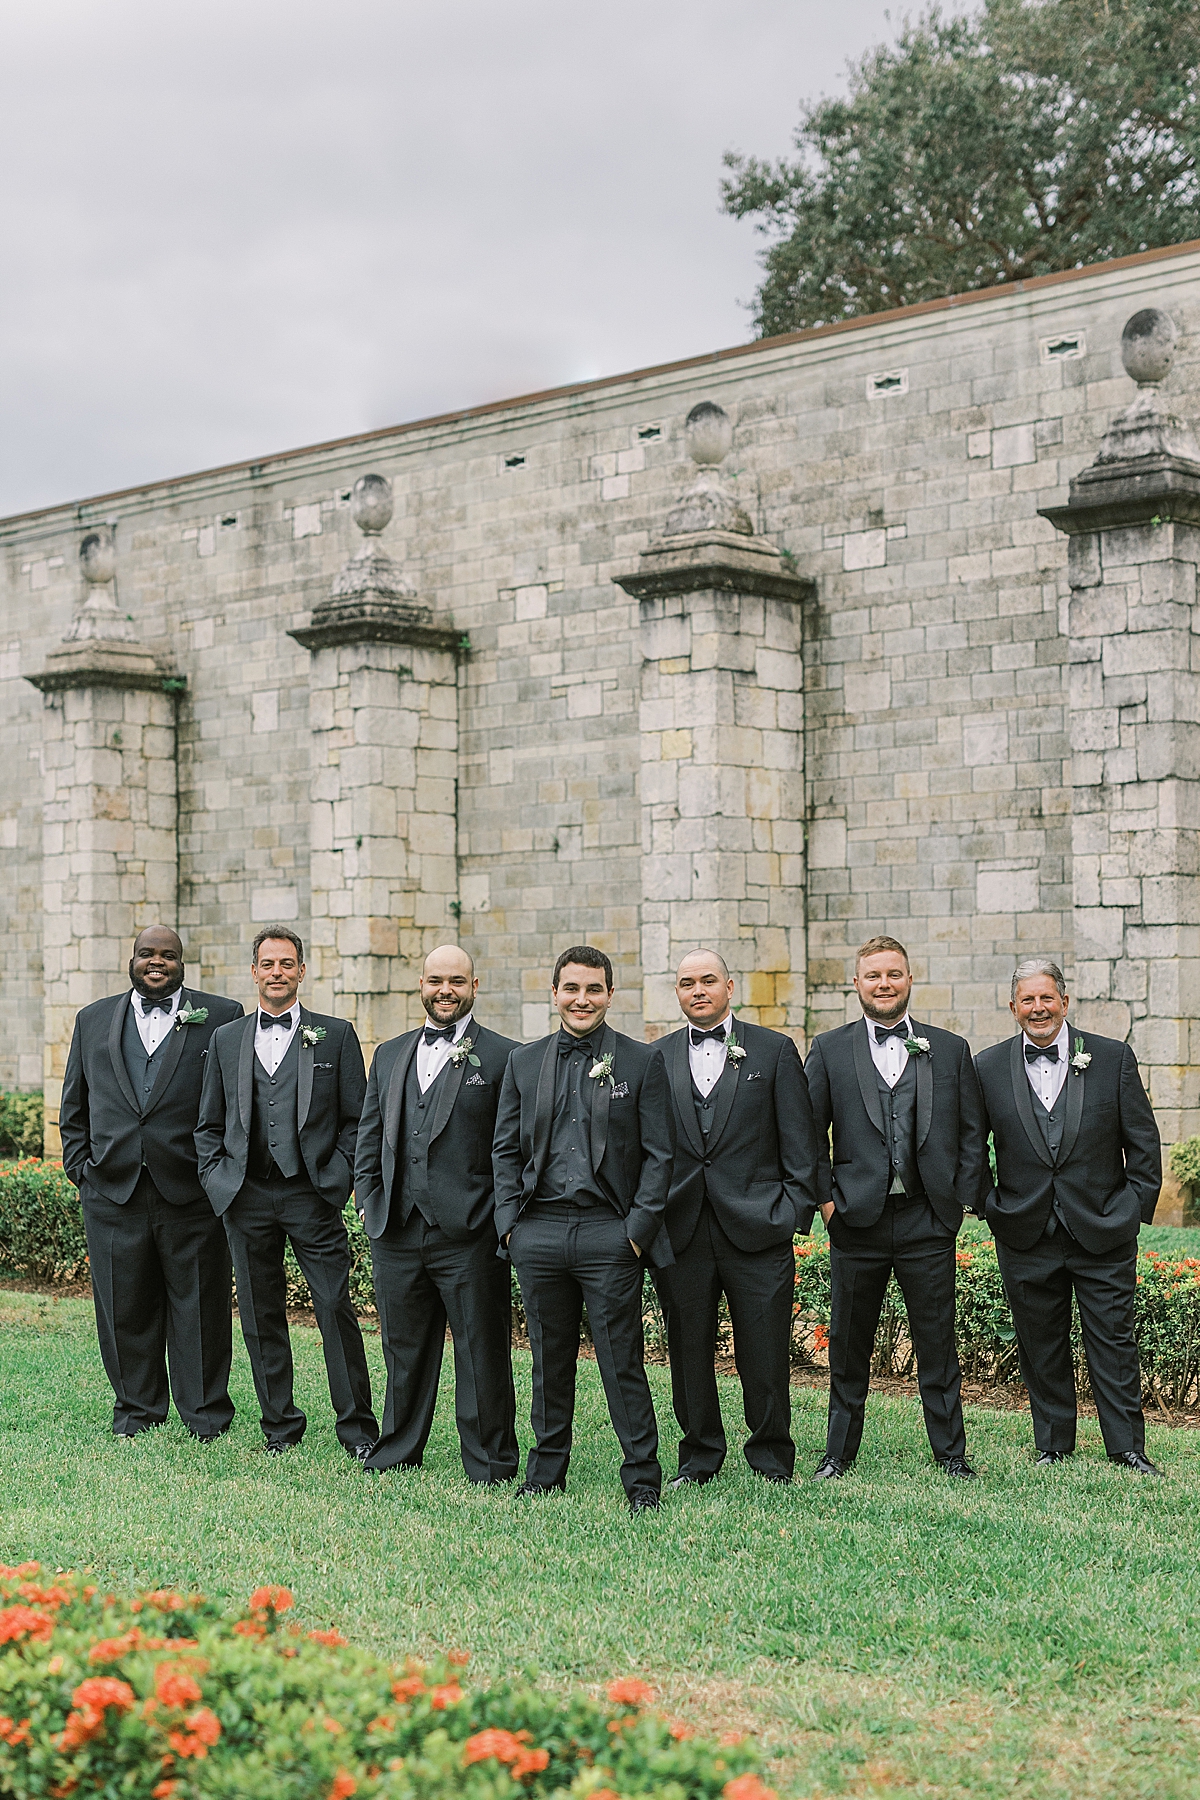 Joey and his groomsmen at their Ancient Spanish Monastery Wedding venue